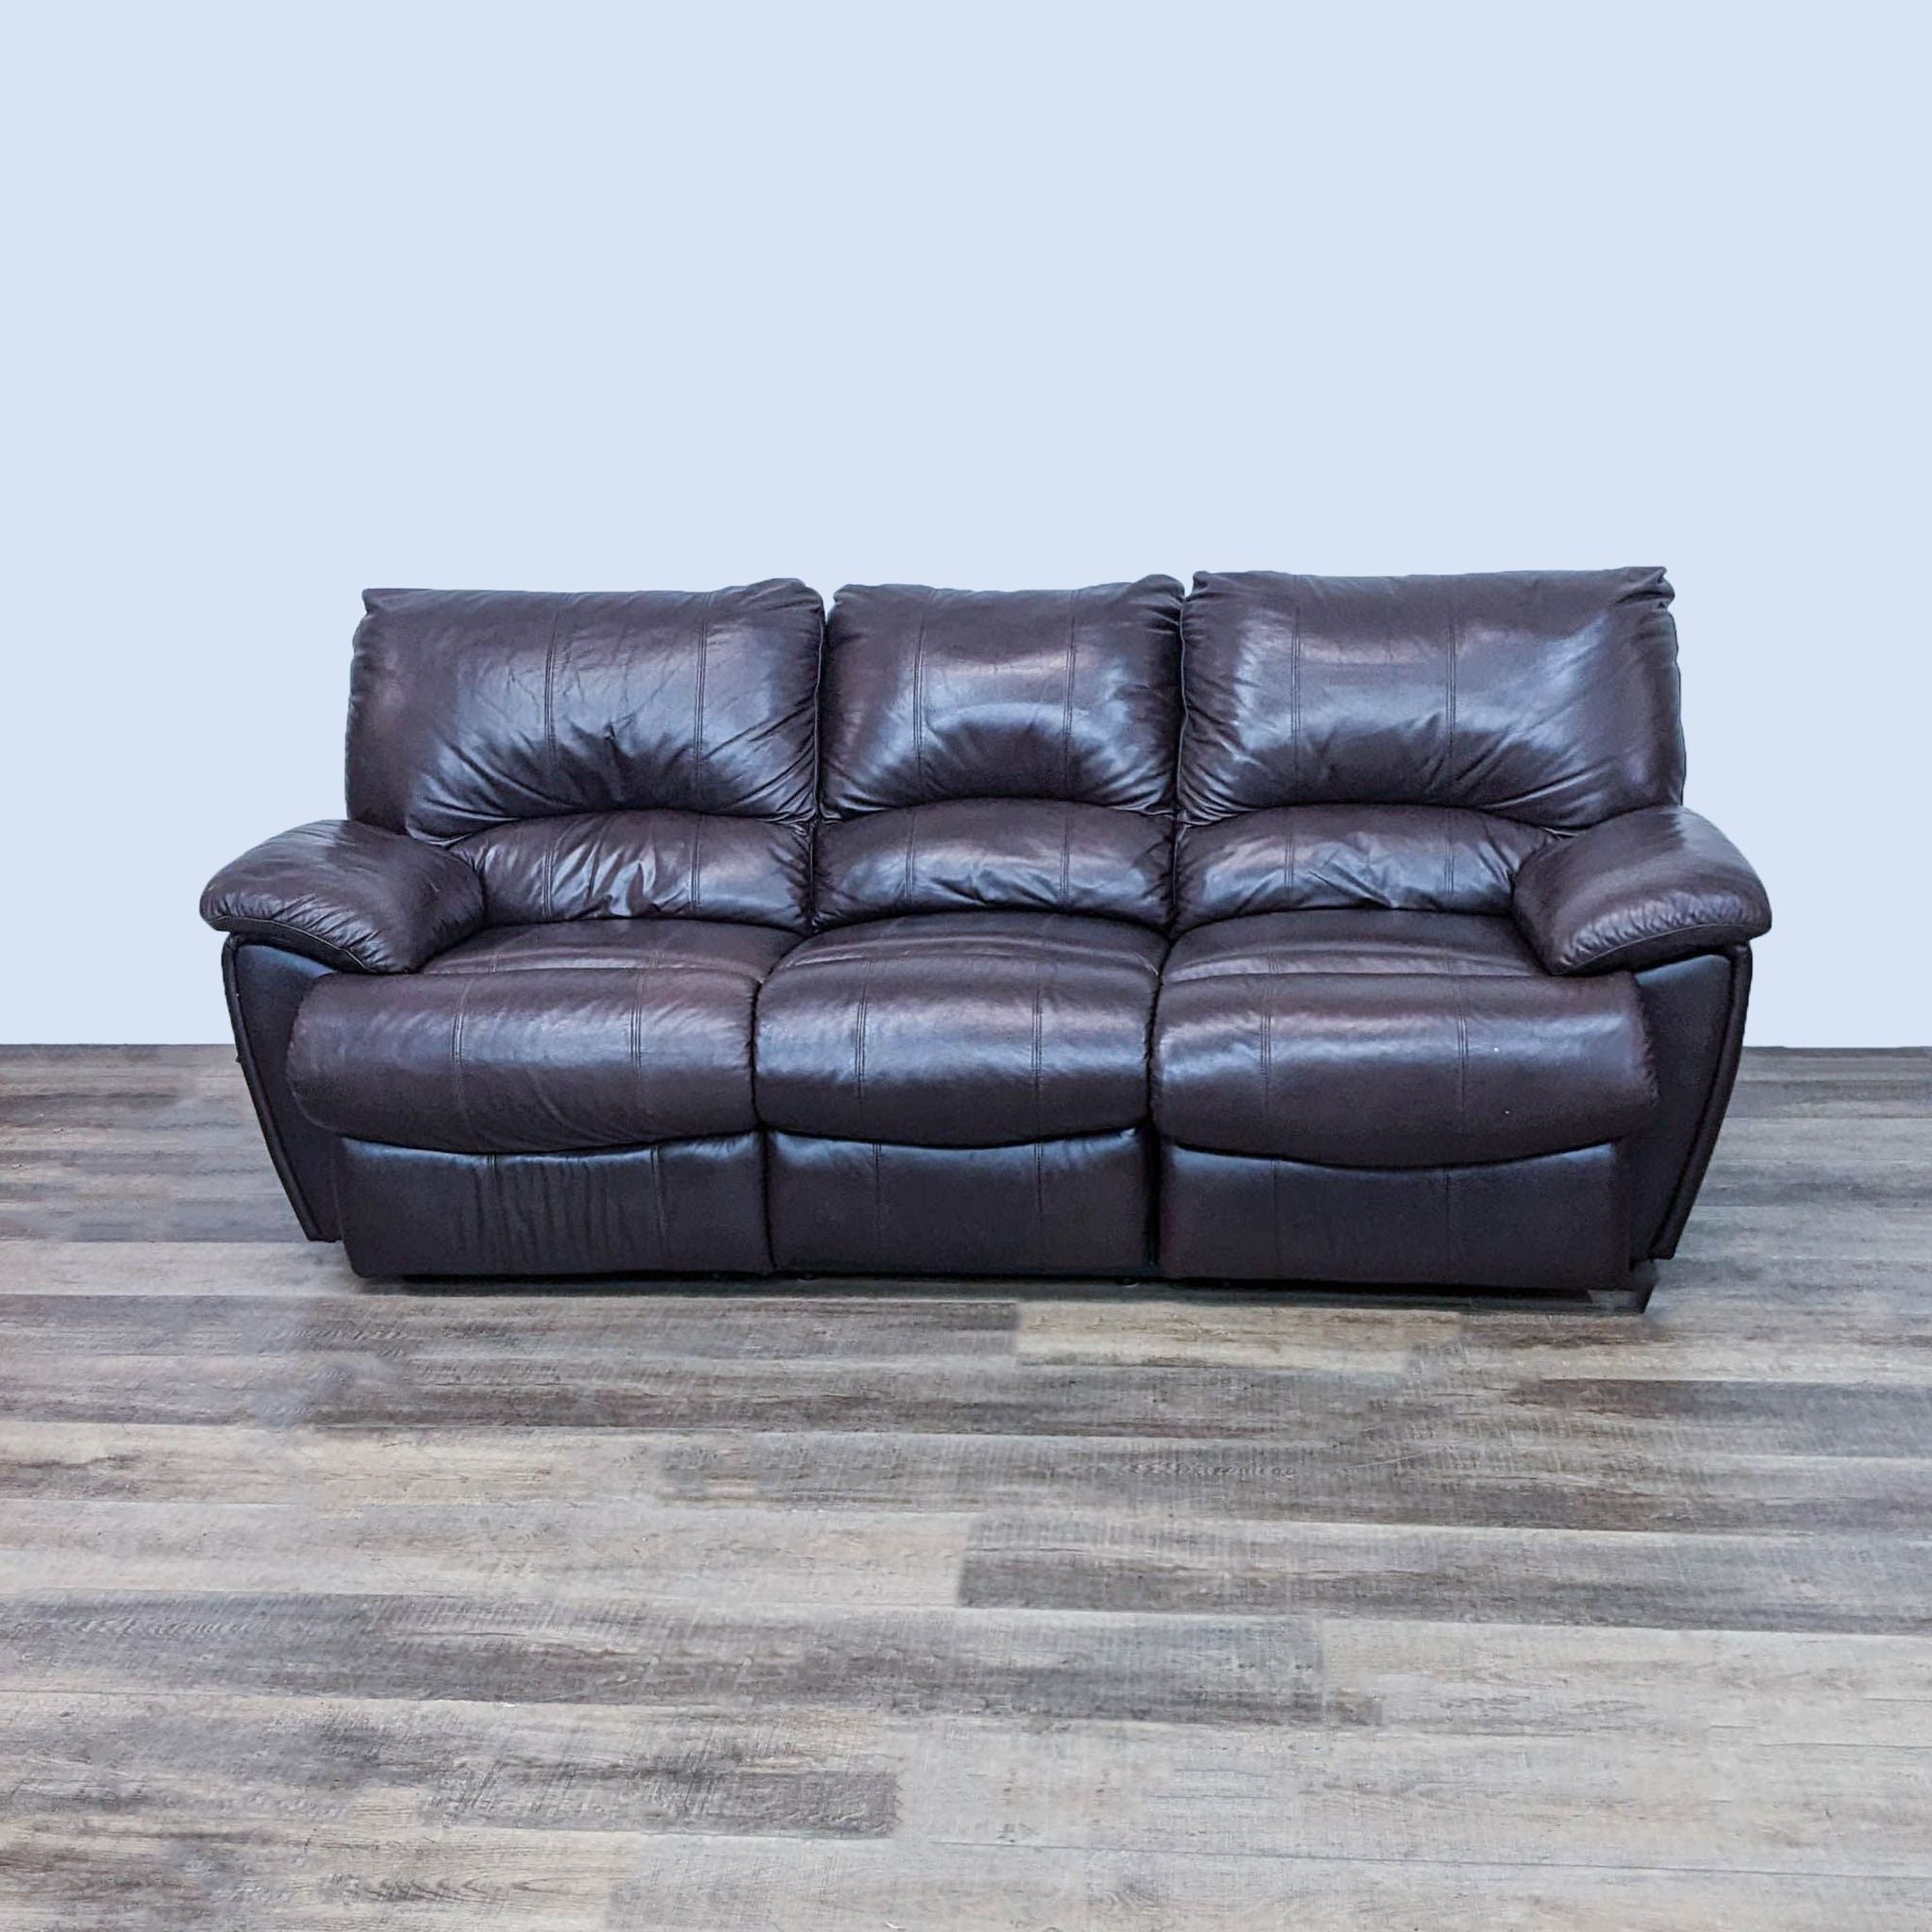 Three-seater Reperch sofa featuring high back and cushioned pillow-top arms in a leather look, fully reclined on one end, against a wood-style floor.